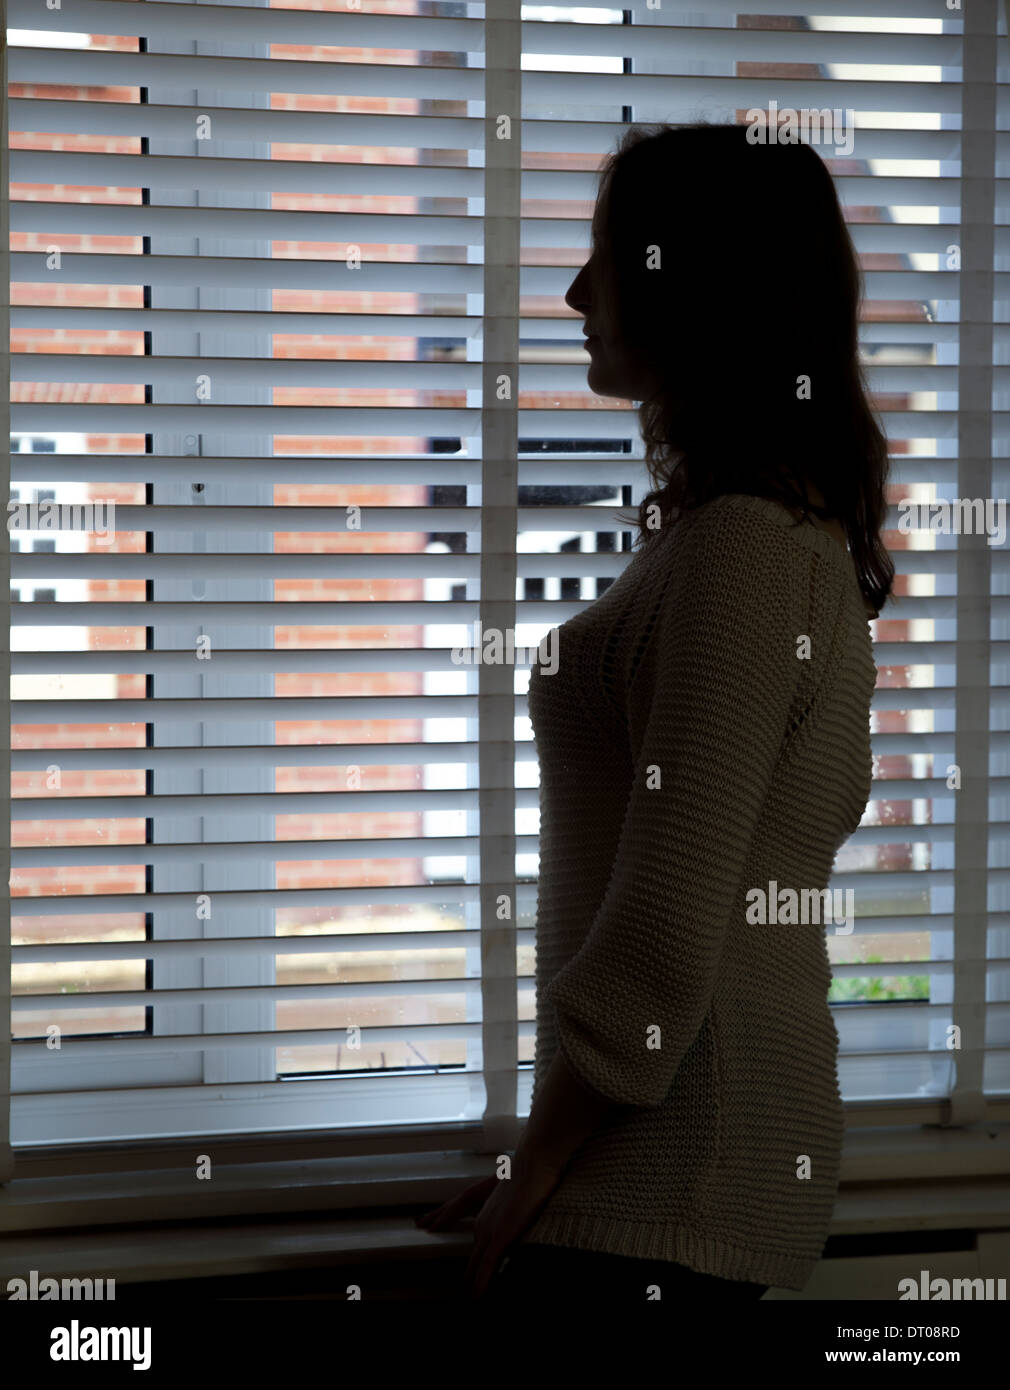 Silhouette of woman standing by a window. Profile/side view. Stock Photo